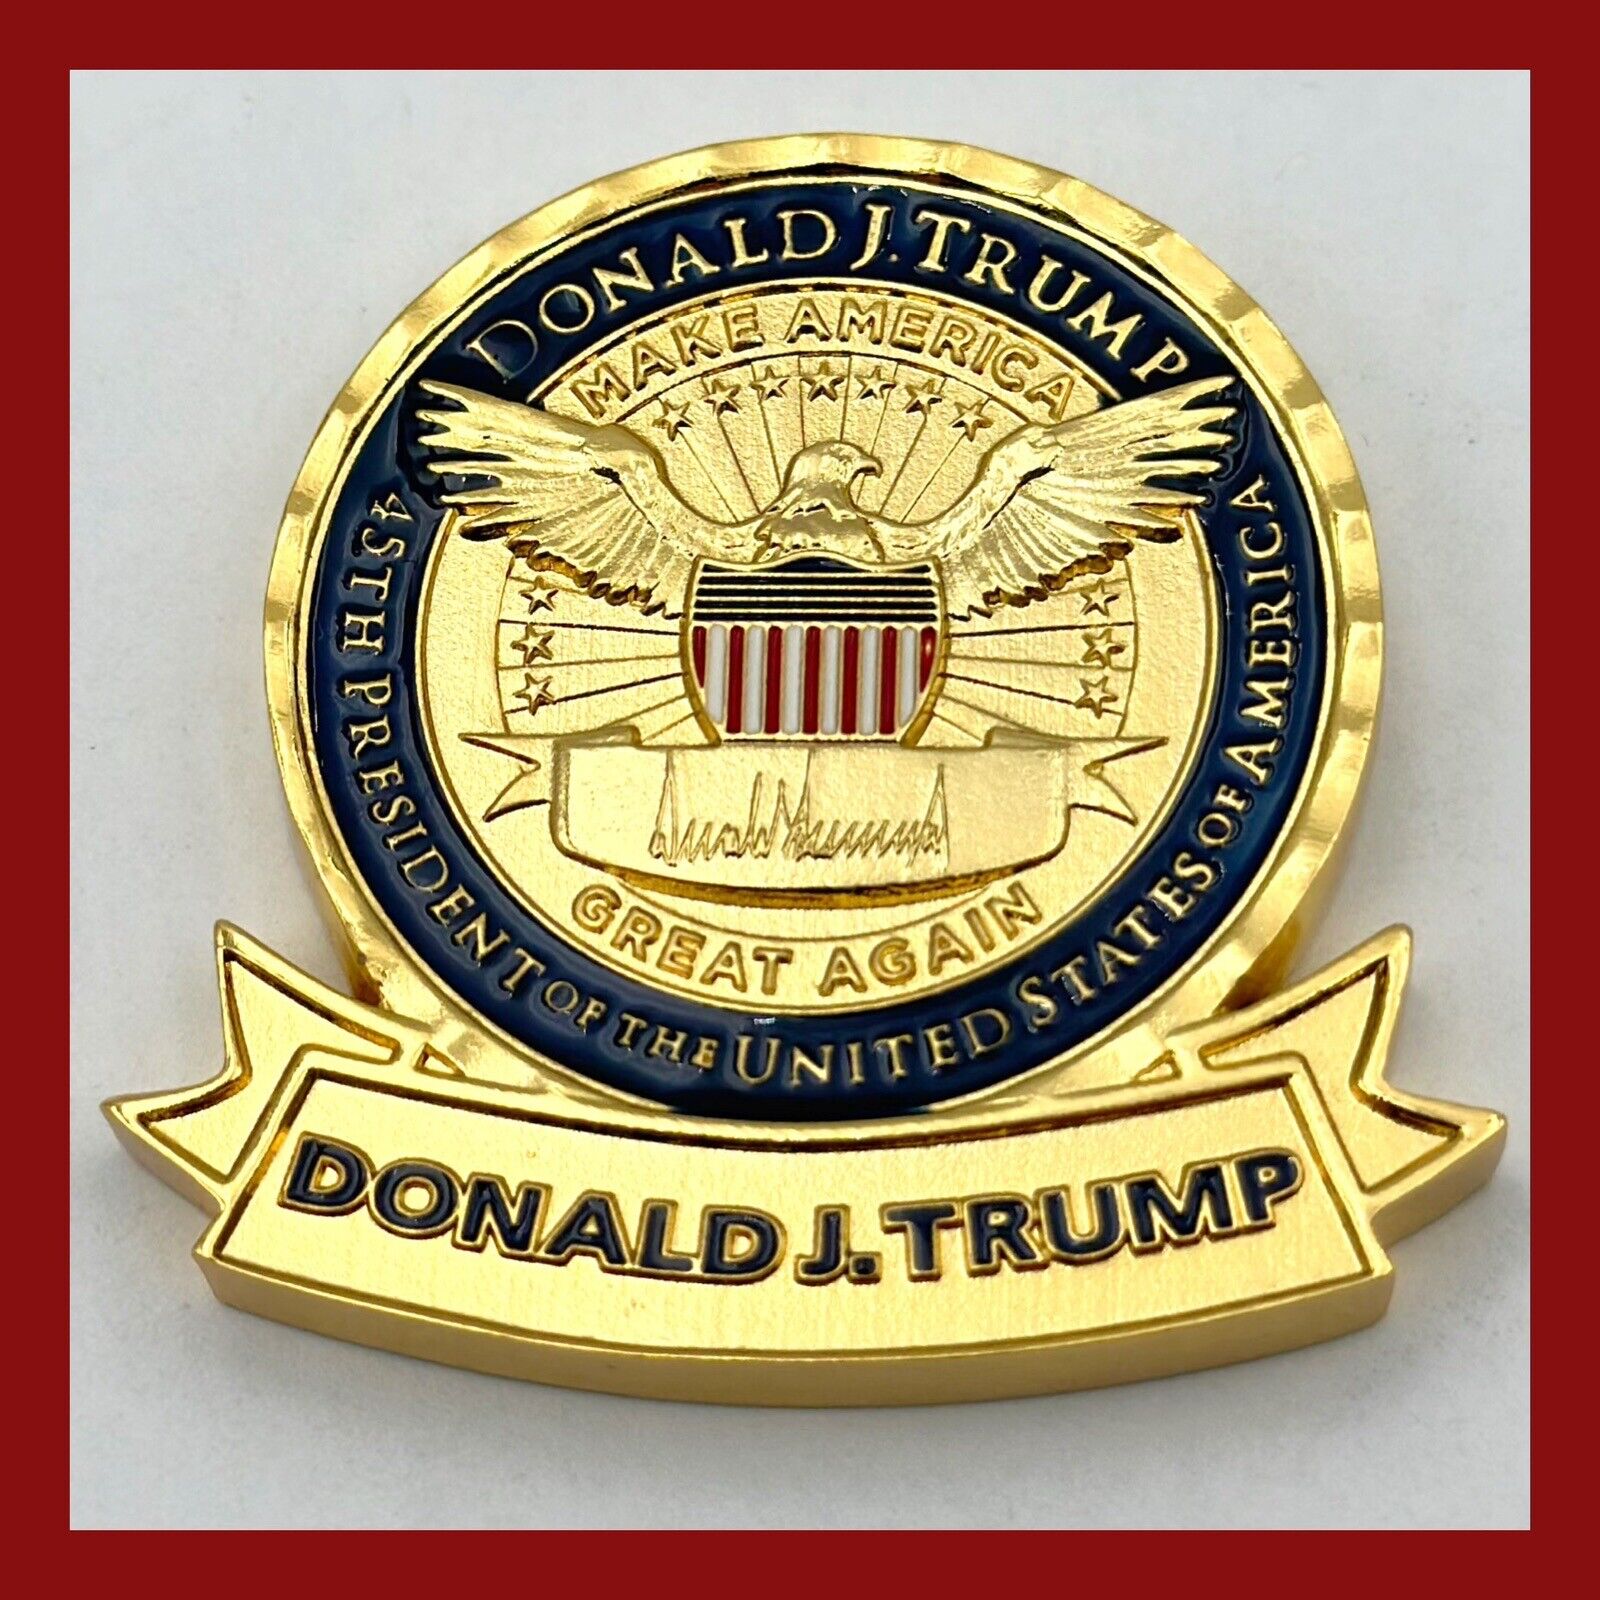 ❤️Authentic President of the United States Donald J. Trump #45 Challenge Coin❤️